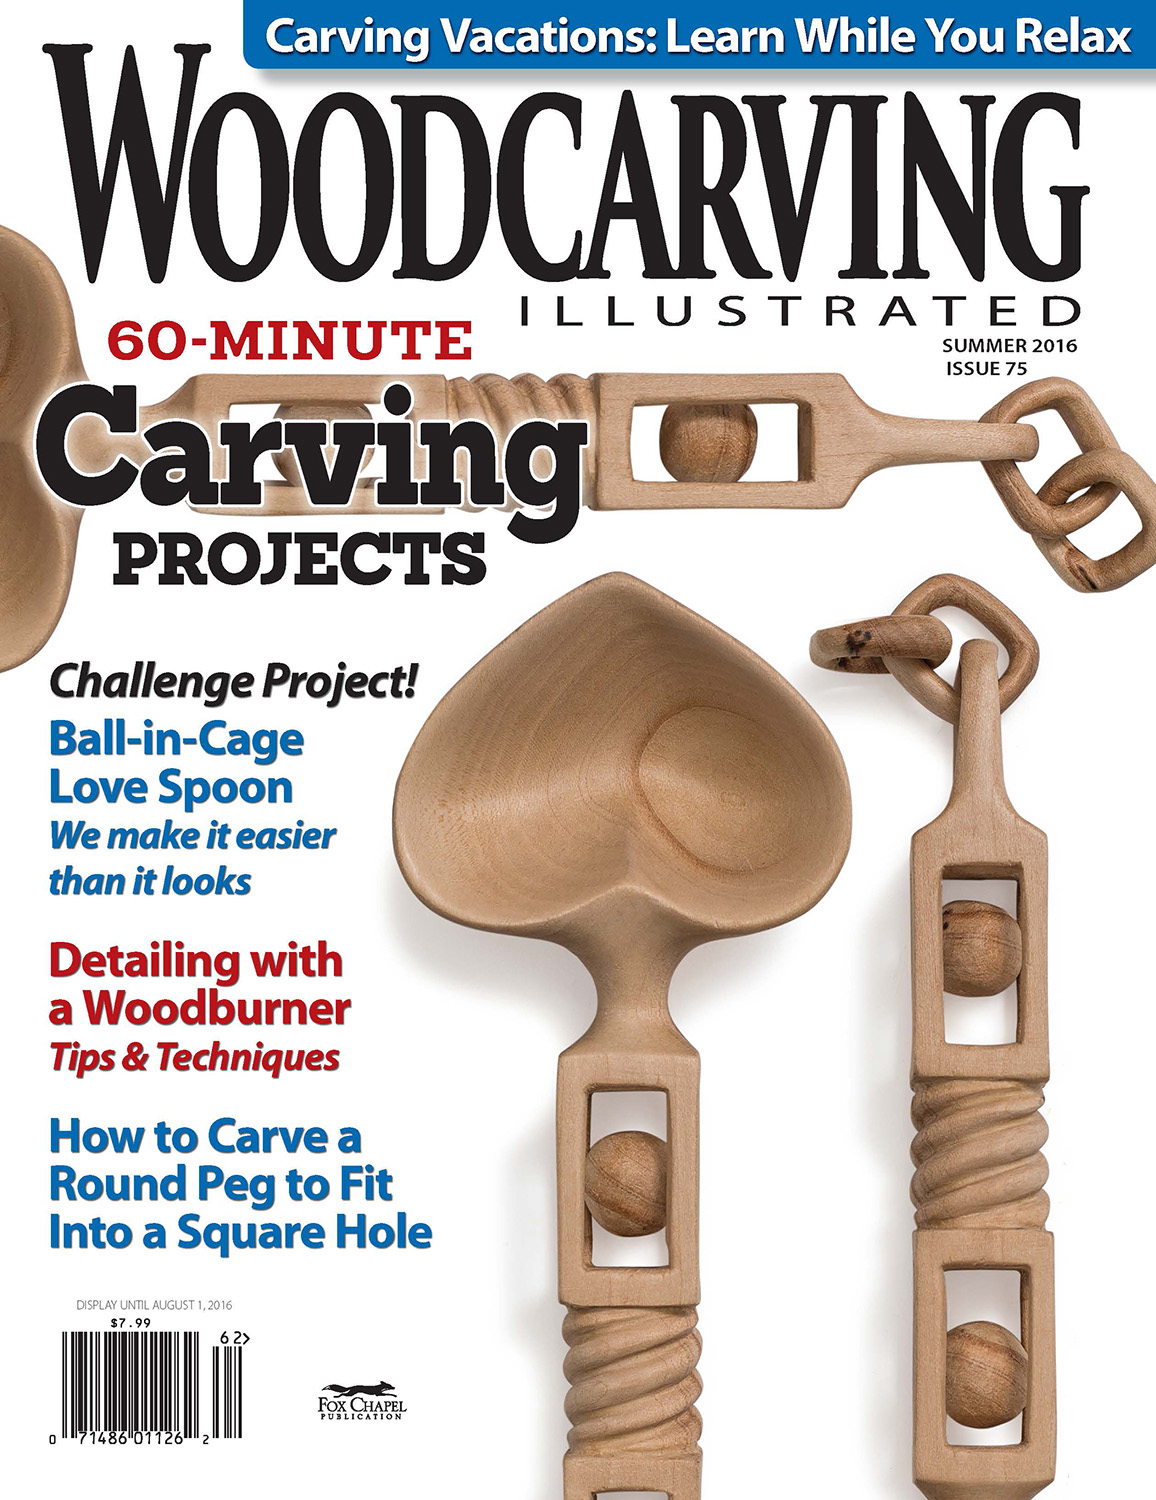 Woodcarving Illustrated Summer 2016 issue 75